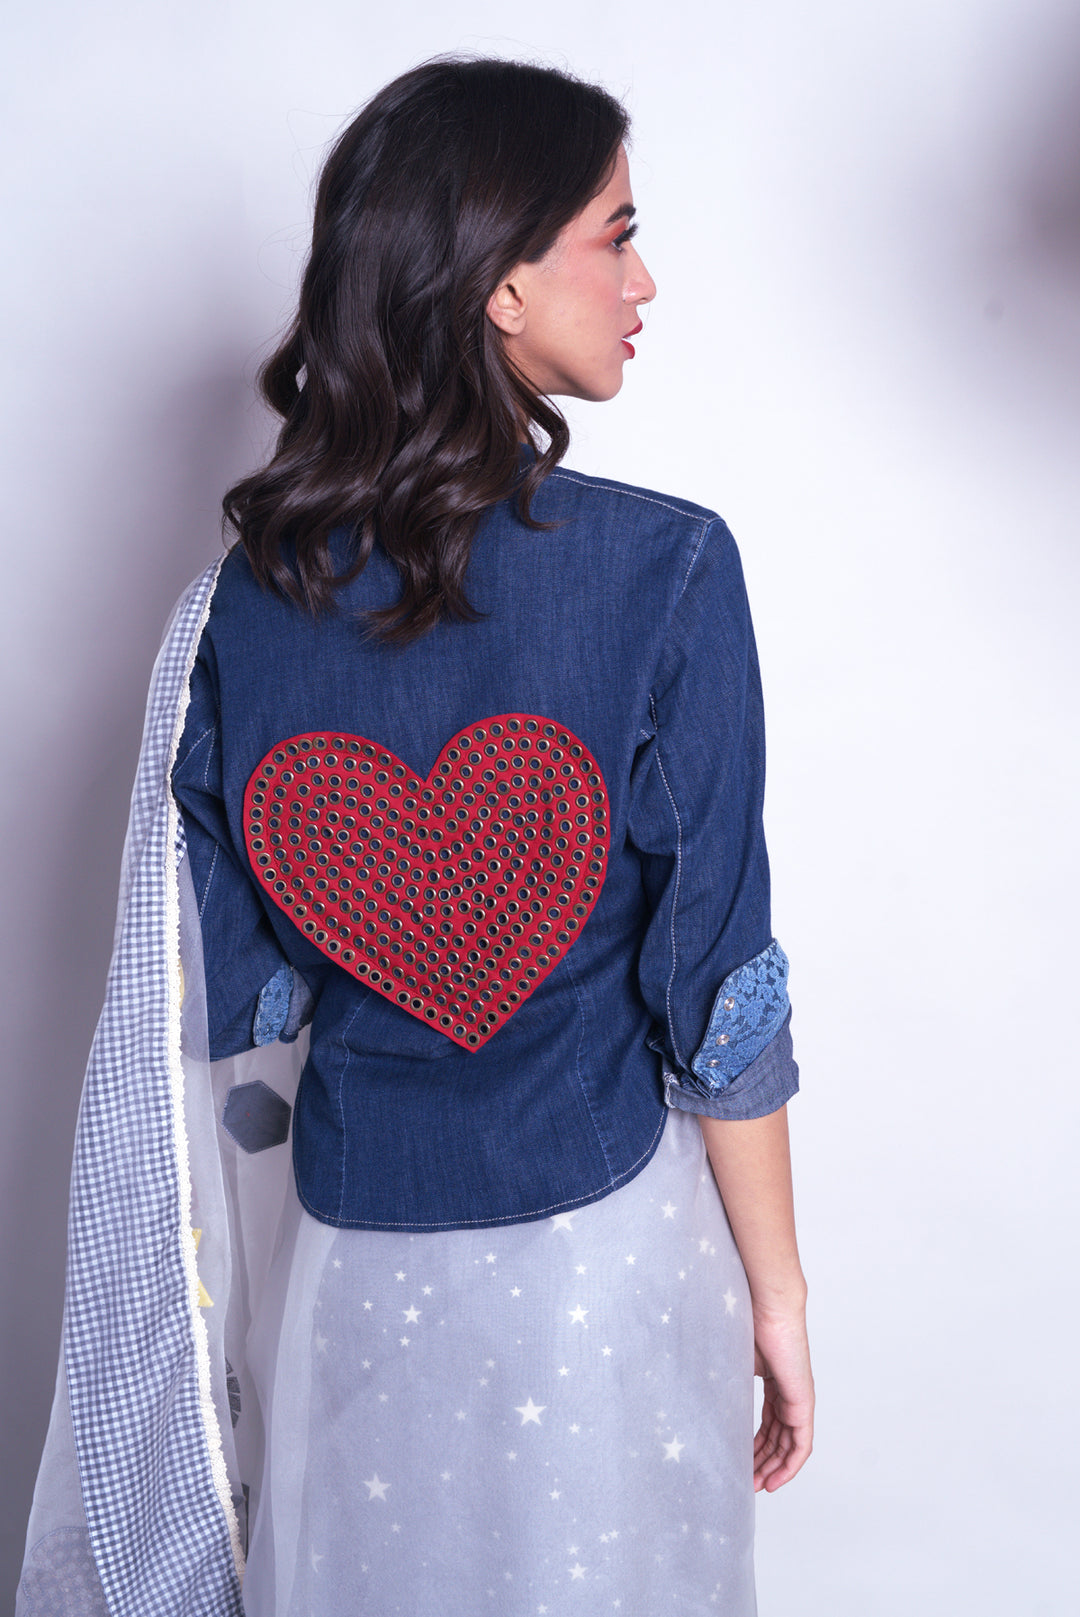 Denim shirt with large handmade heart studded details on the back